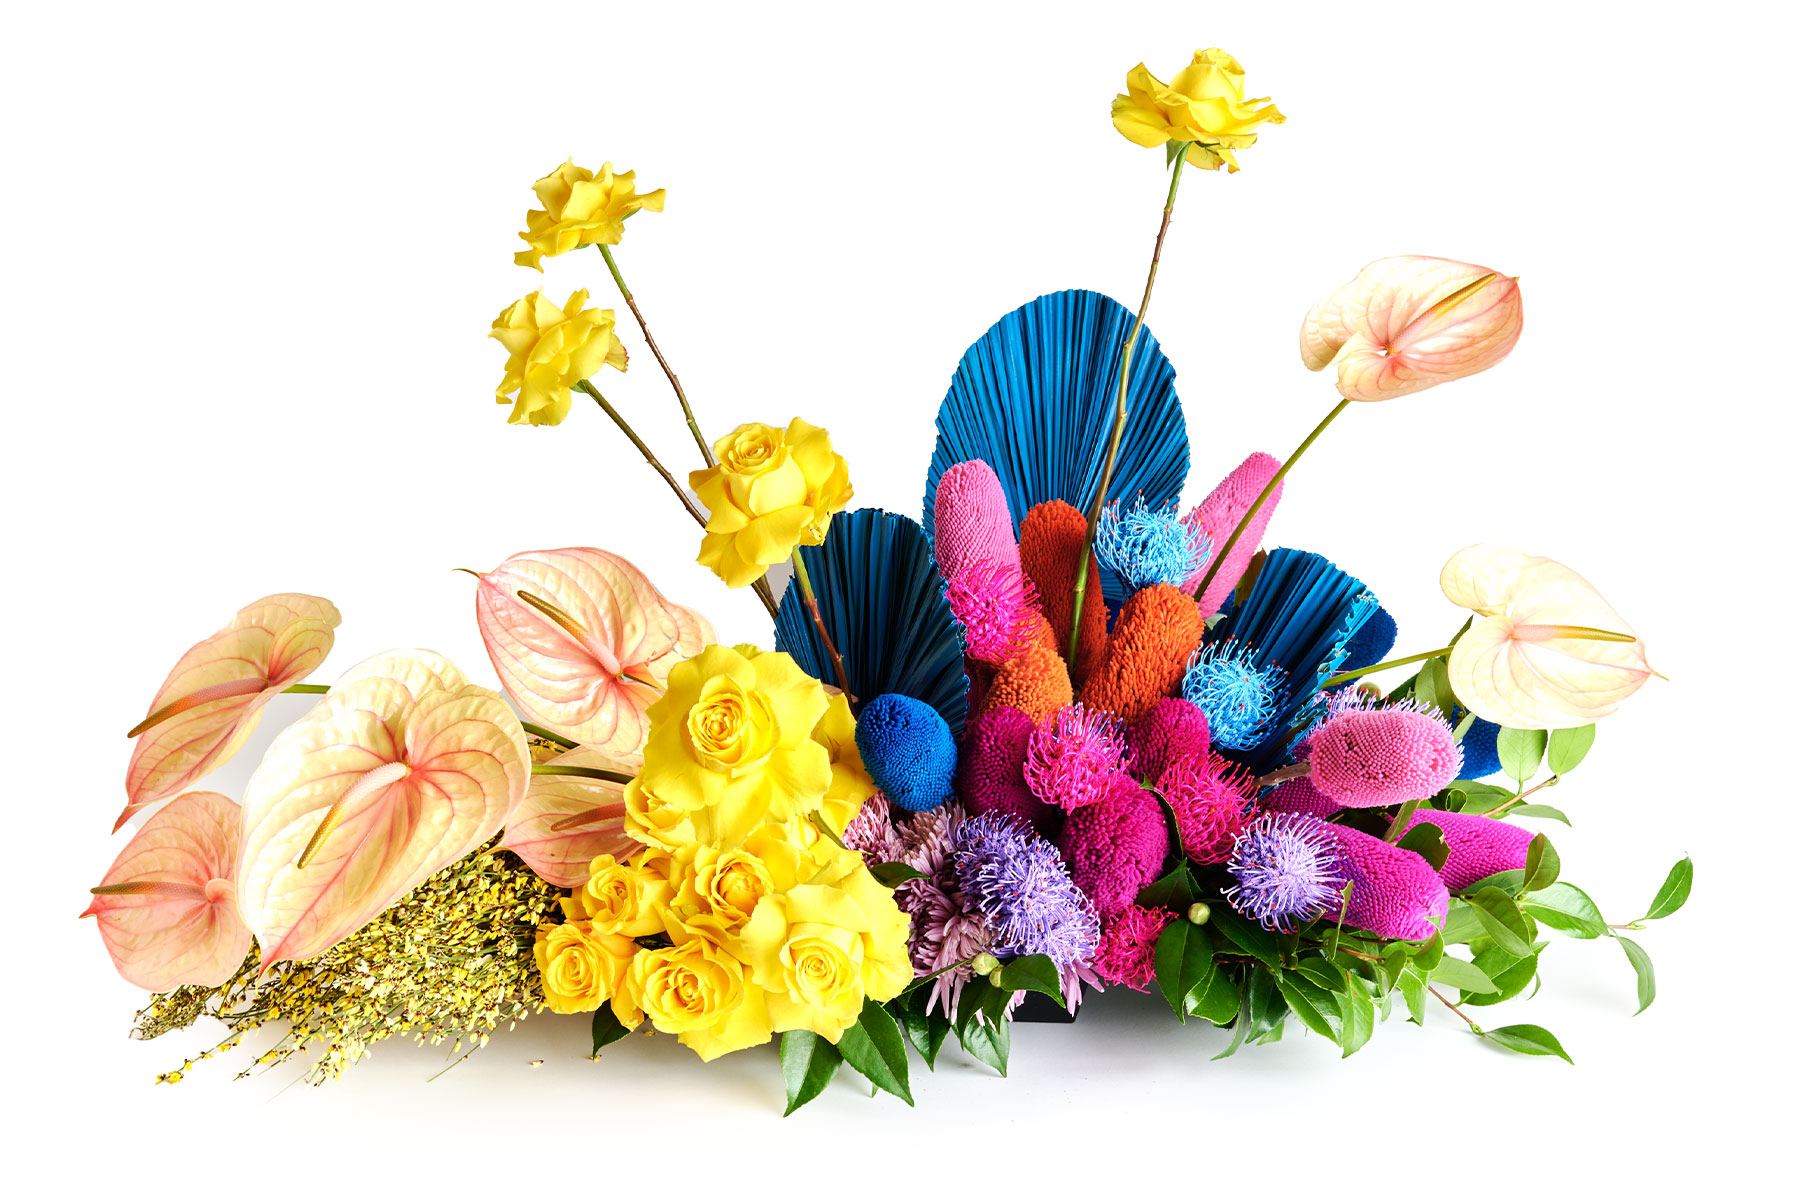 The Botanical Mix Floral Crafted Arrangements